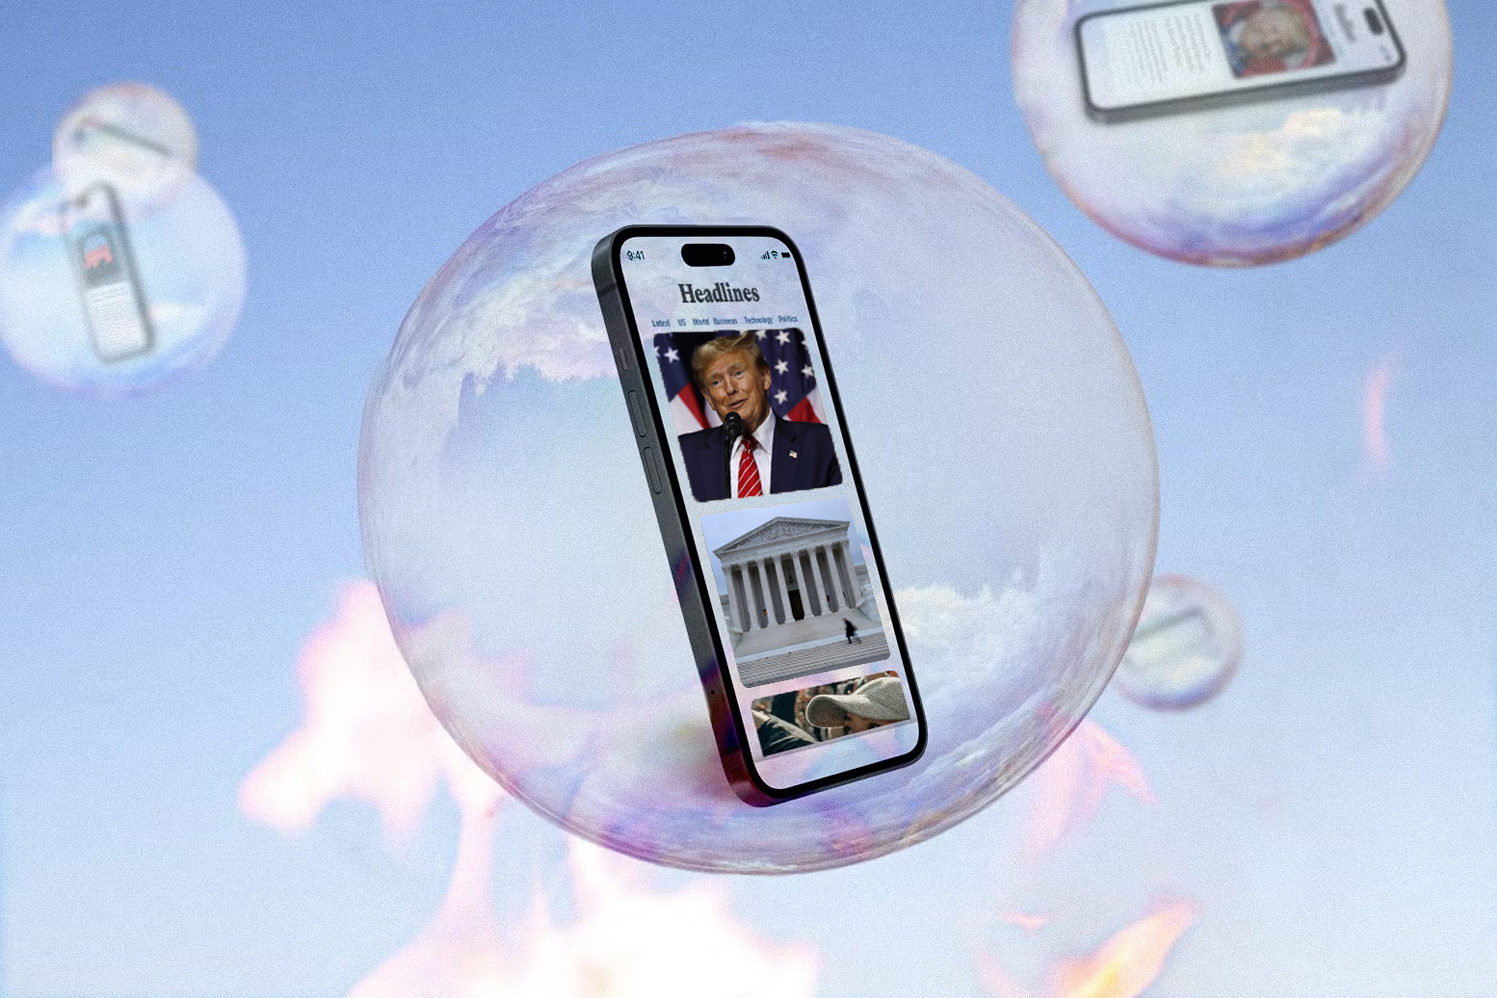 A phone with news headlines on the screen, trapped inside of a bubble.